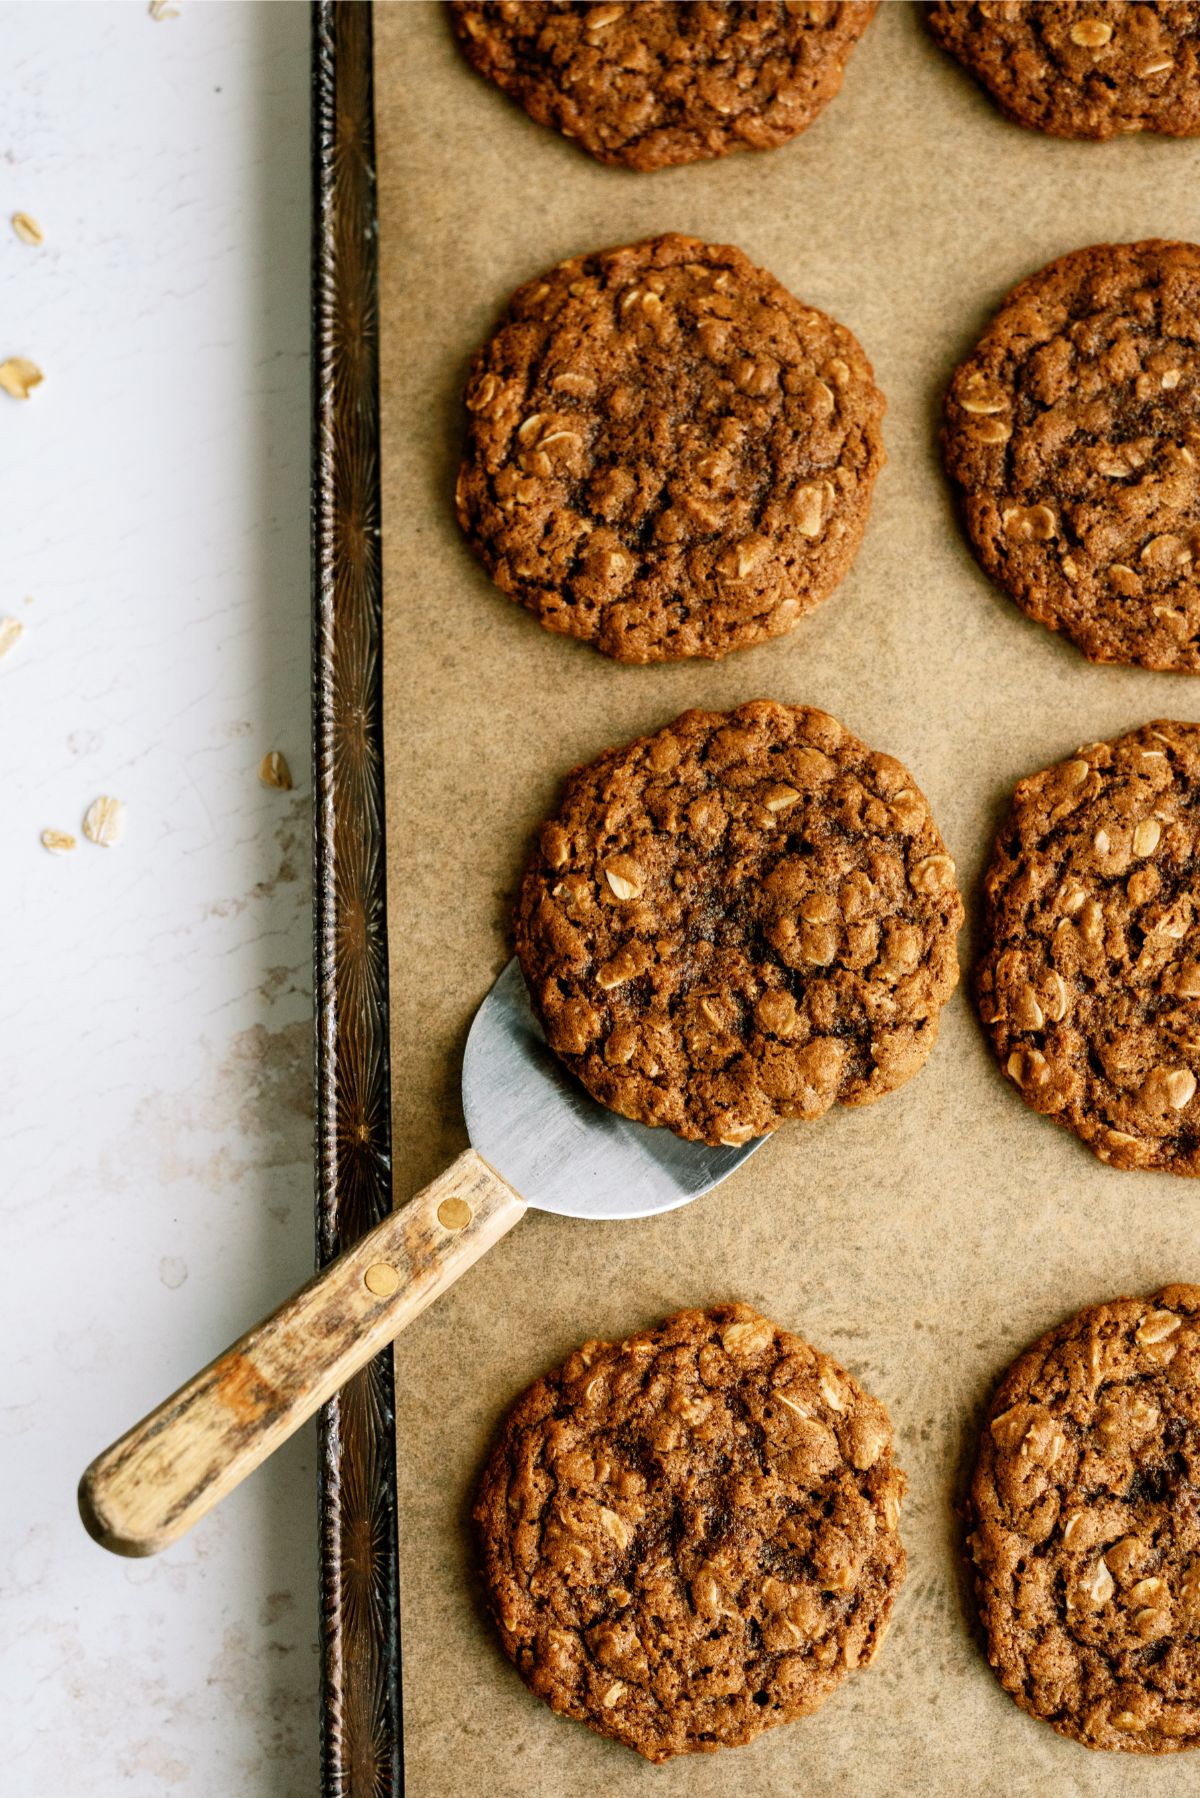 A spatula lifting Oatmeal Gingerbread Cookie off the cookie sheet